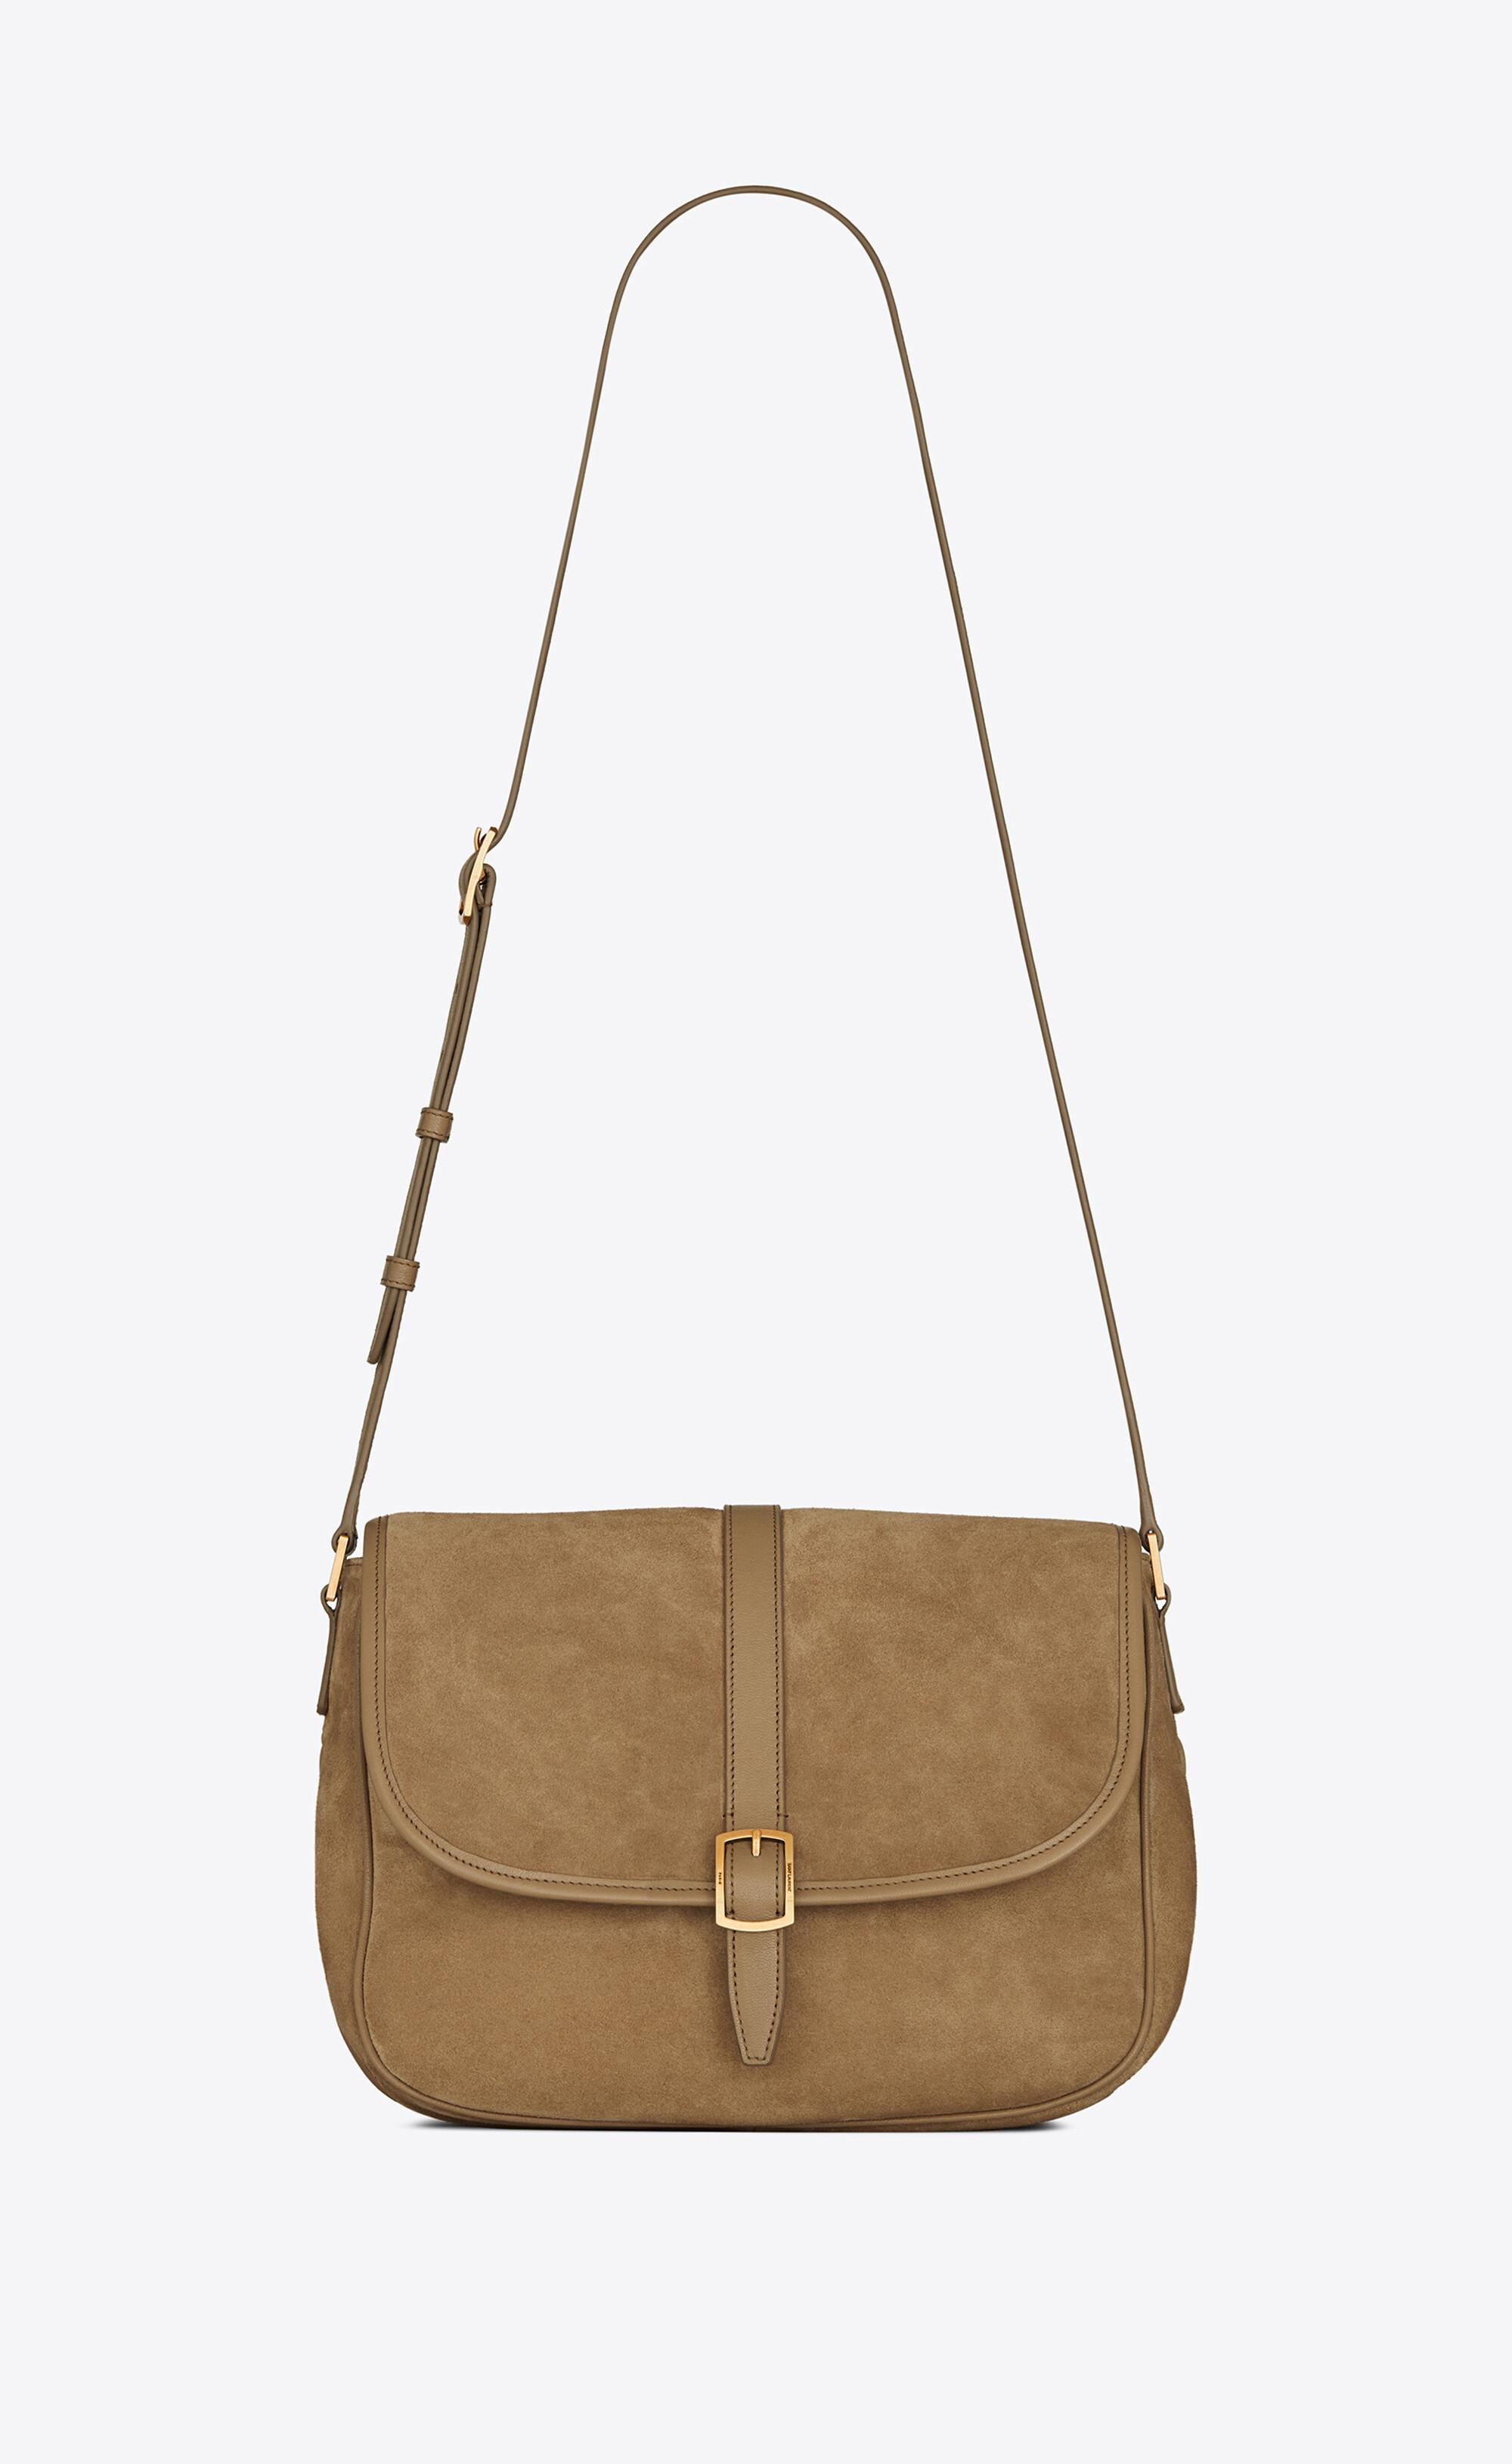 Compare prices for SORBONNE flap bag in suede and vintage leather